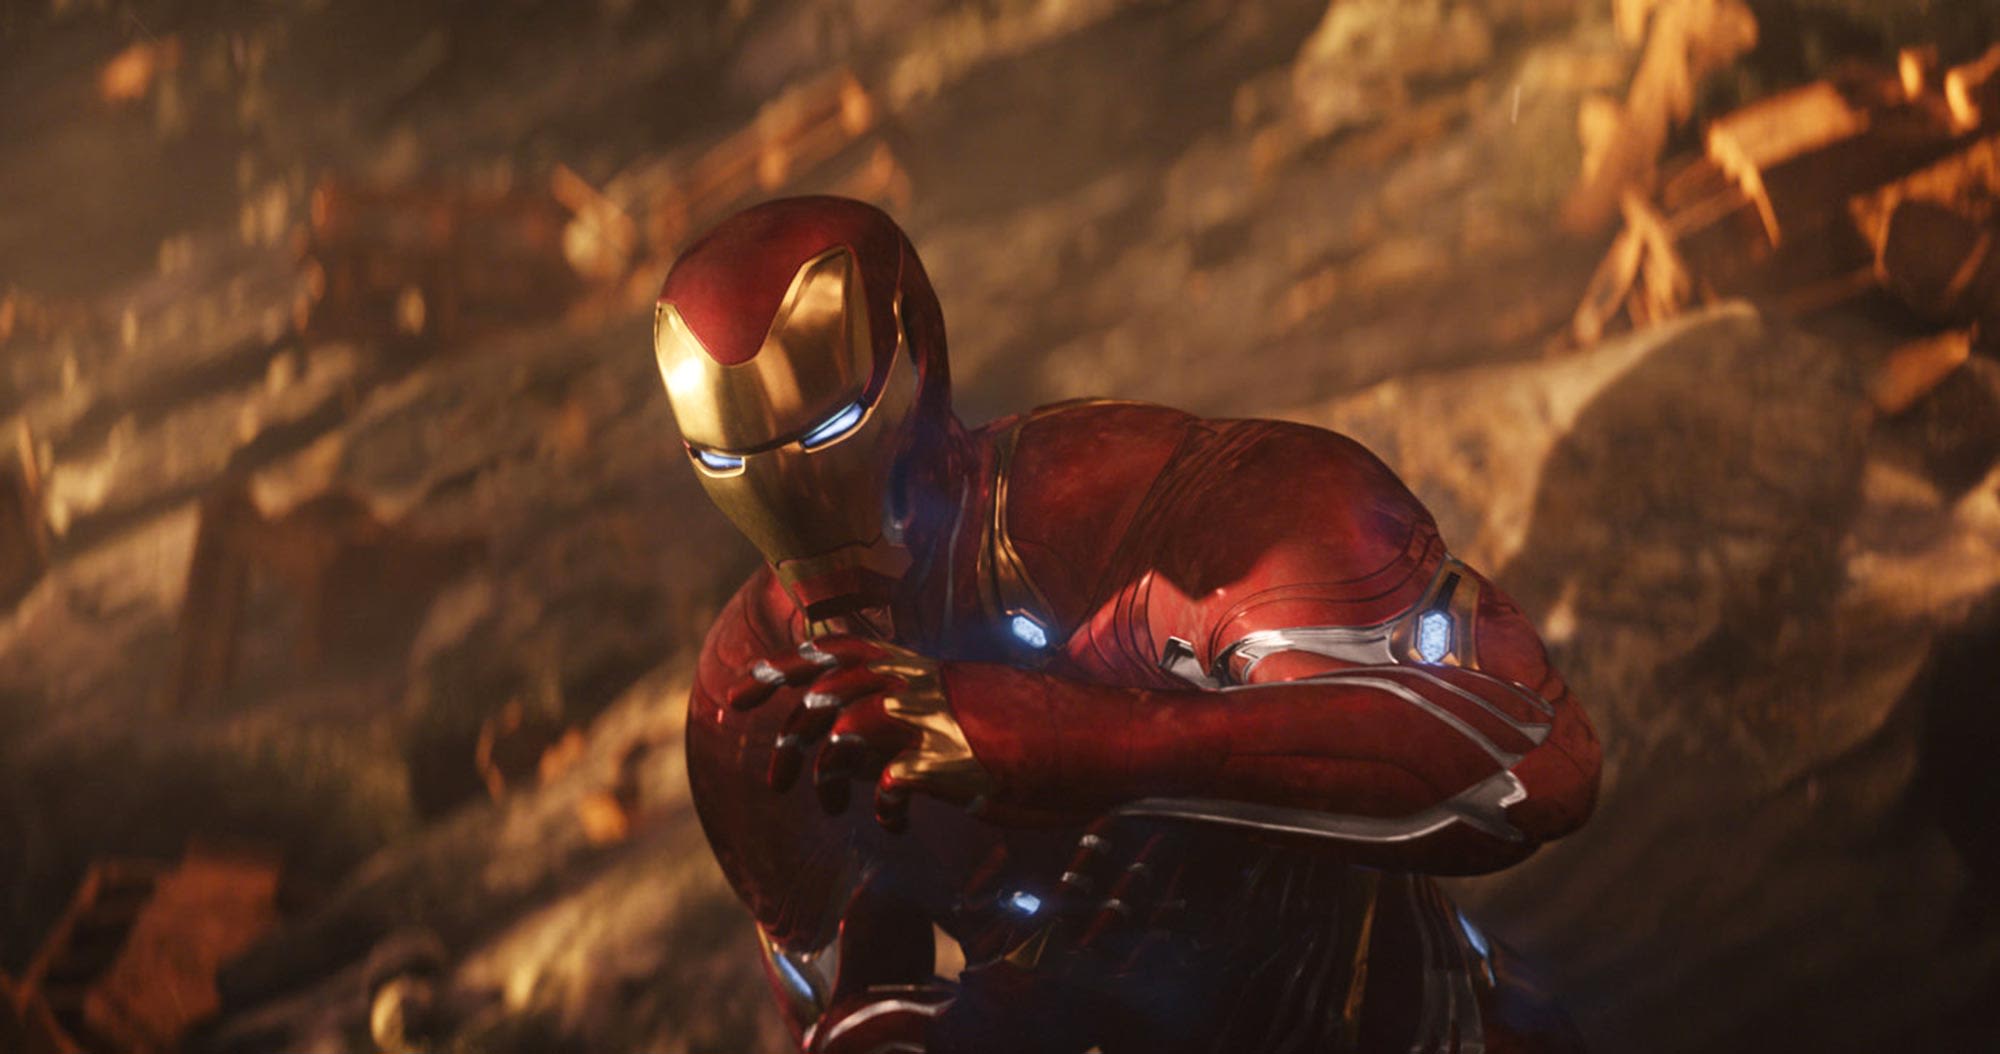 Marvel Studios Boss Teases Whether Robert Downey Jr. Could Return as Iron Man: ‘It Can Be Done’